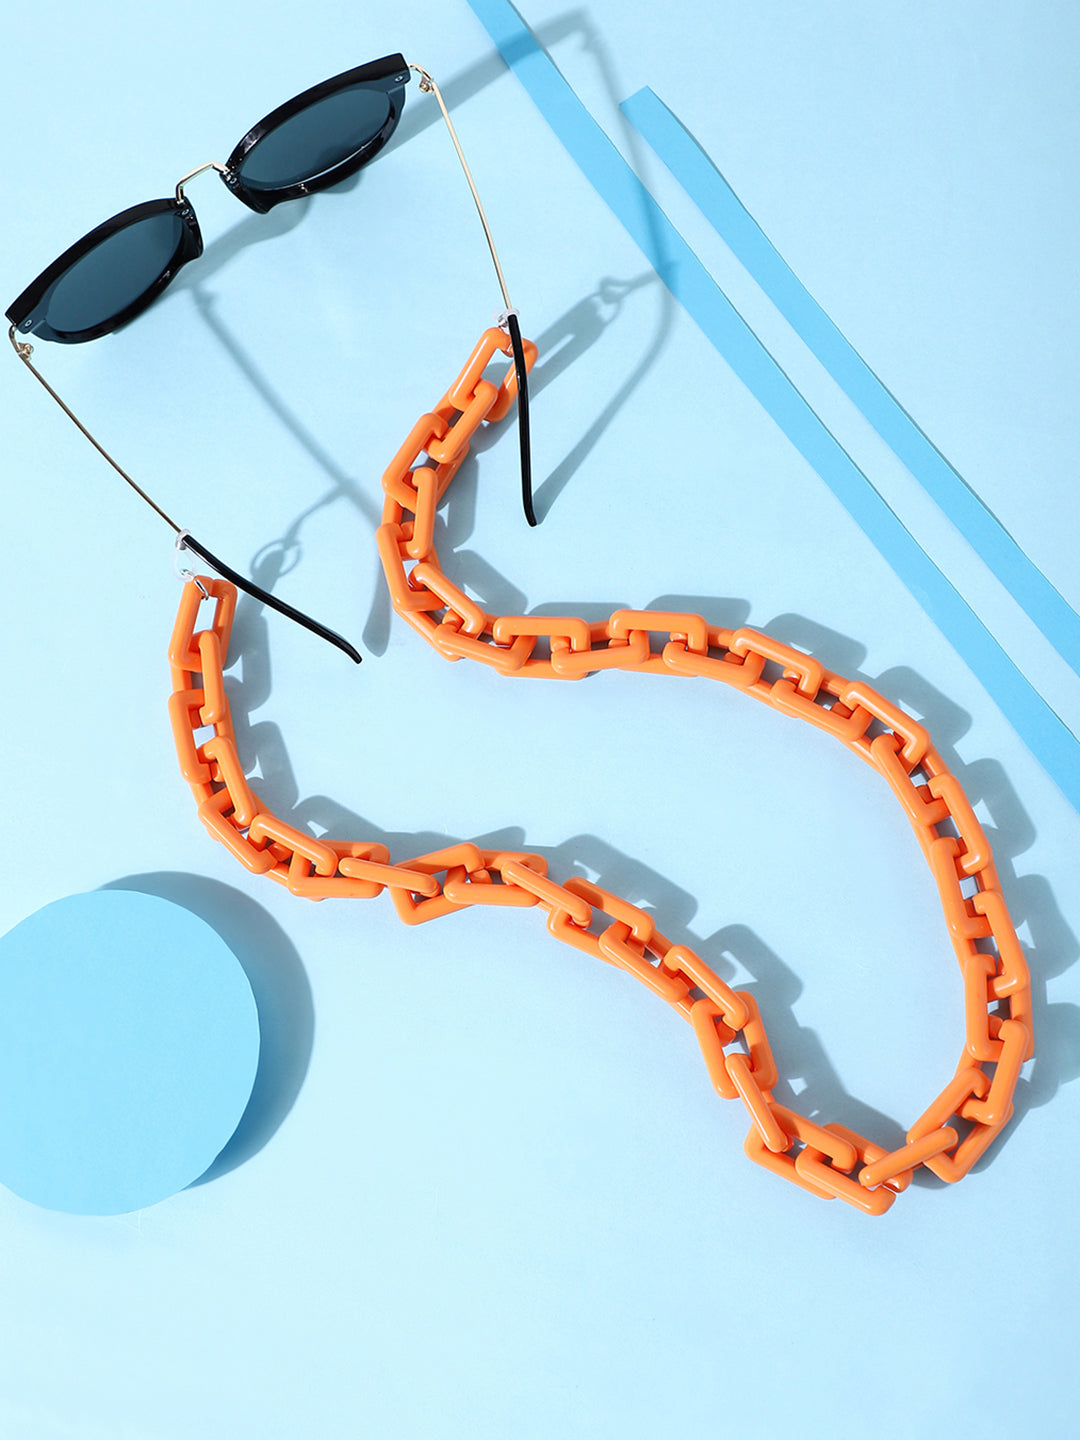 Tequila Sunrise Sunglasses With Chain